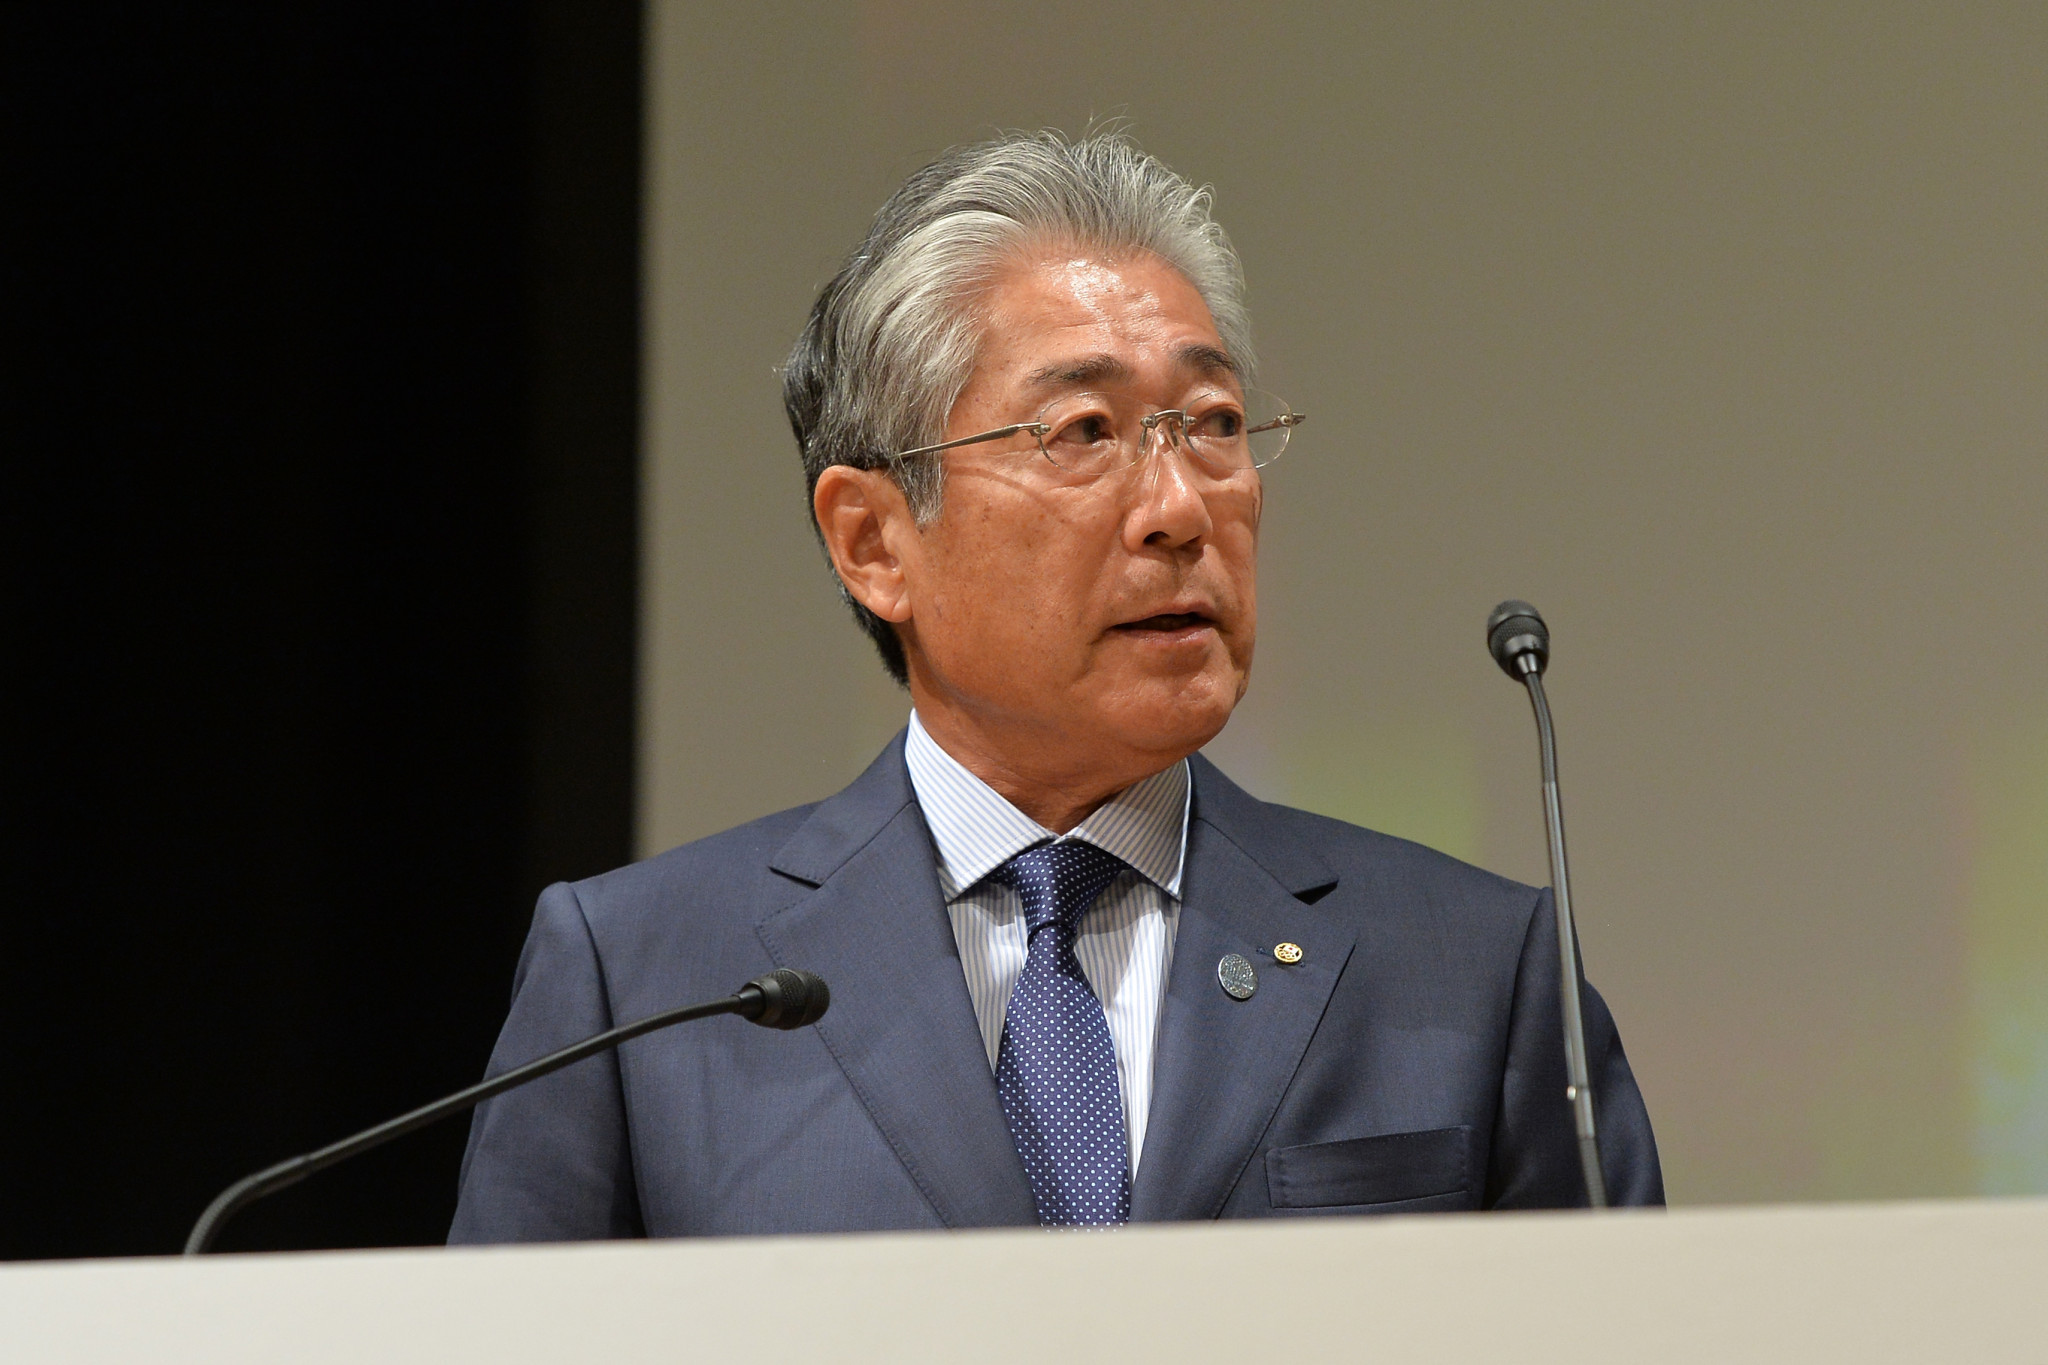 Tsunekazu Takeda is set to be allowed to stay as President of the Japanese Olympic Committee until after Tokyo 2020 despite reaching the 70-year-old age limit ©Getty Images